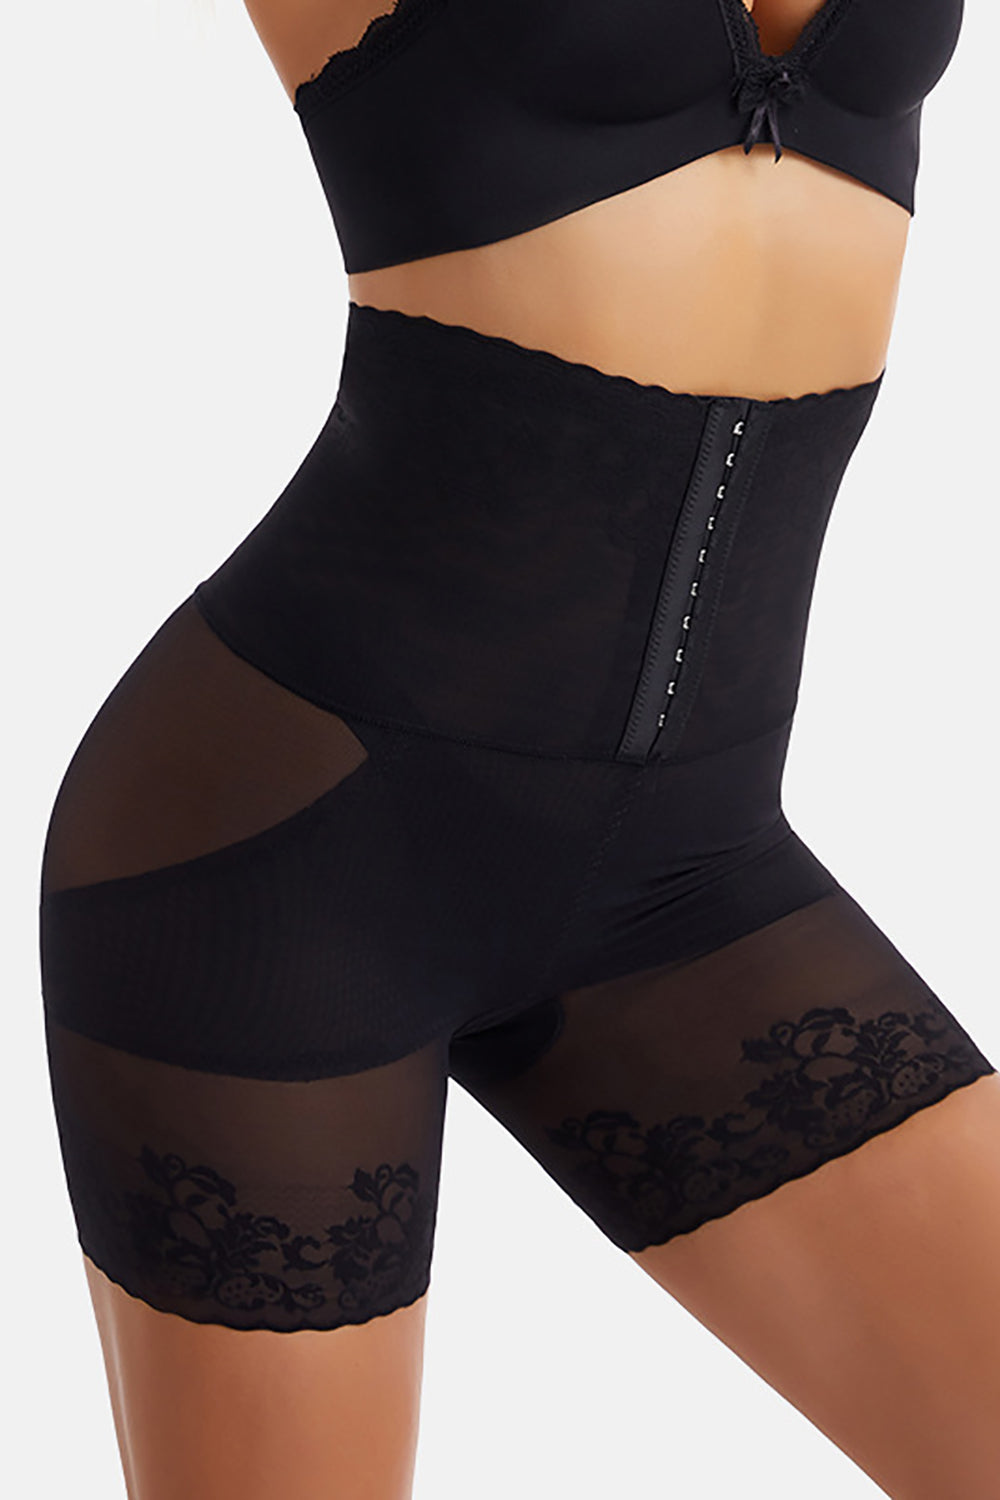 Apricot High-Waisted Butt-Lifting Corset Lace Breathable Shapewear